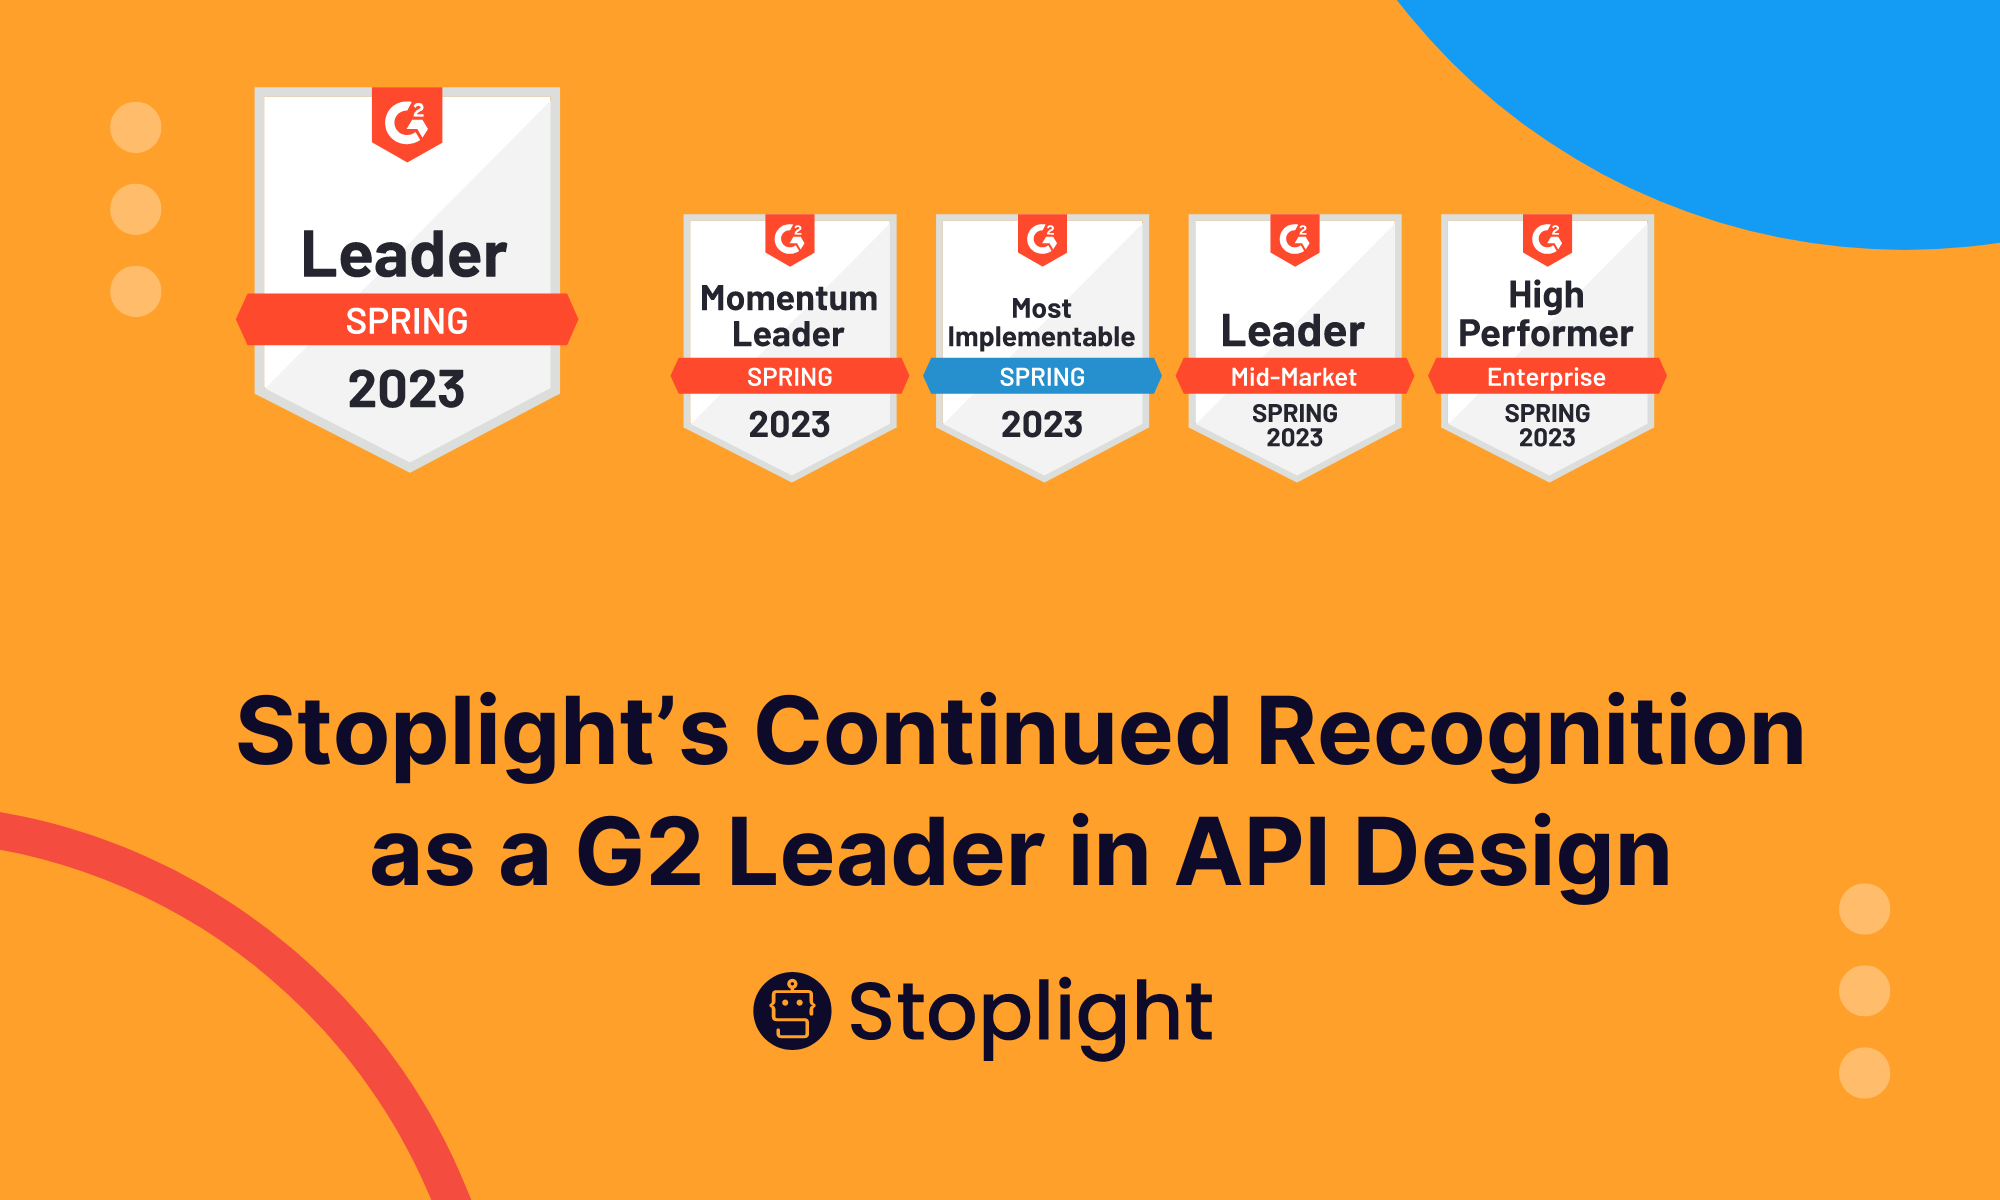 Stoplight’s Continued Recognition as a Leader in API Design